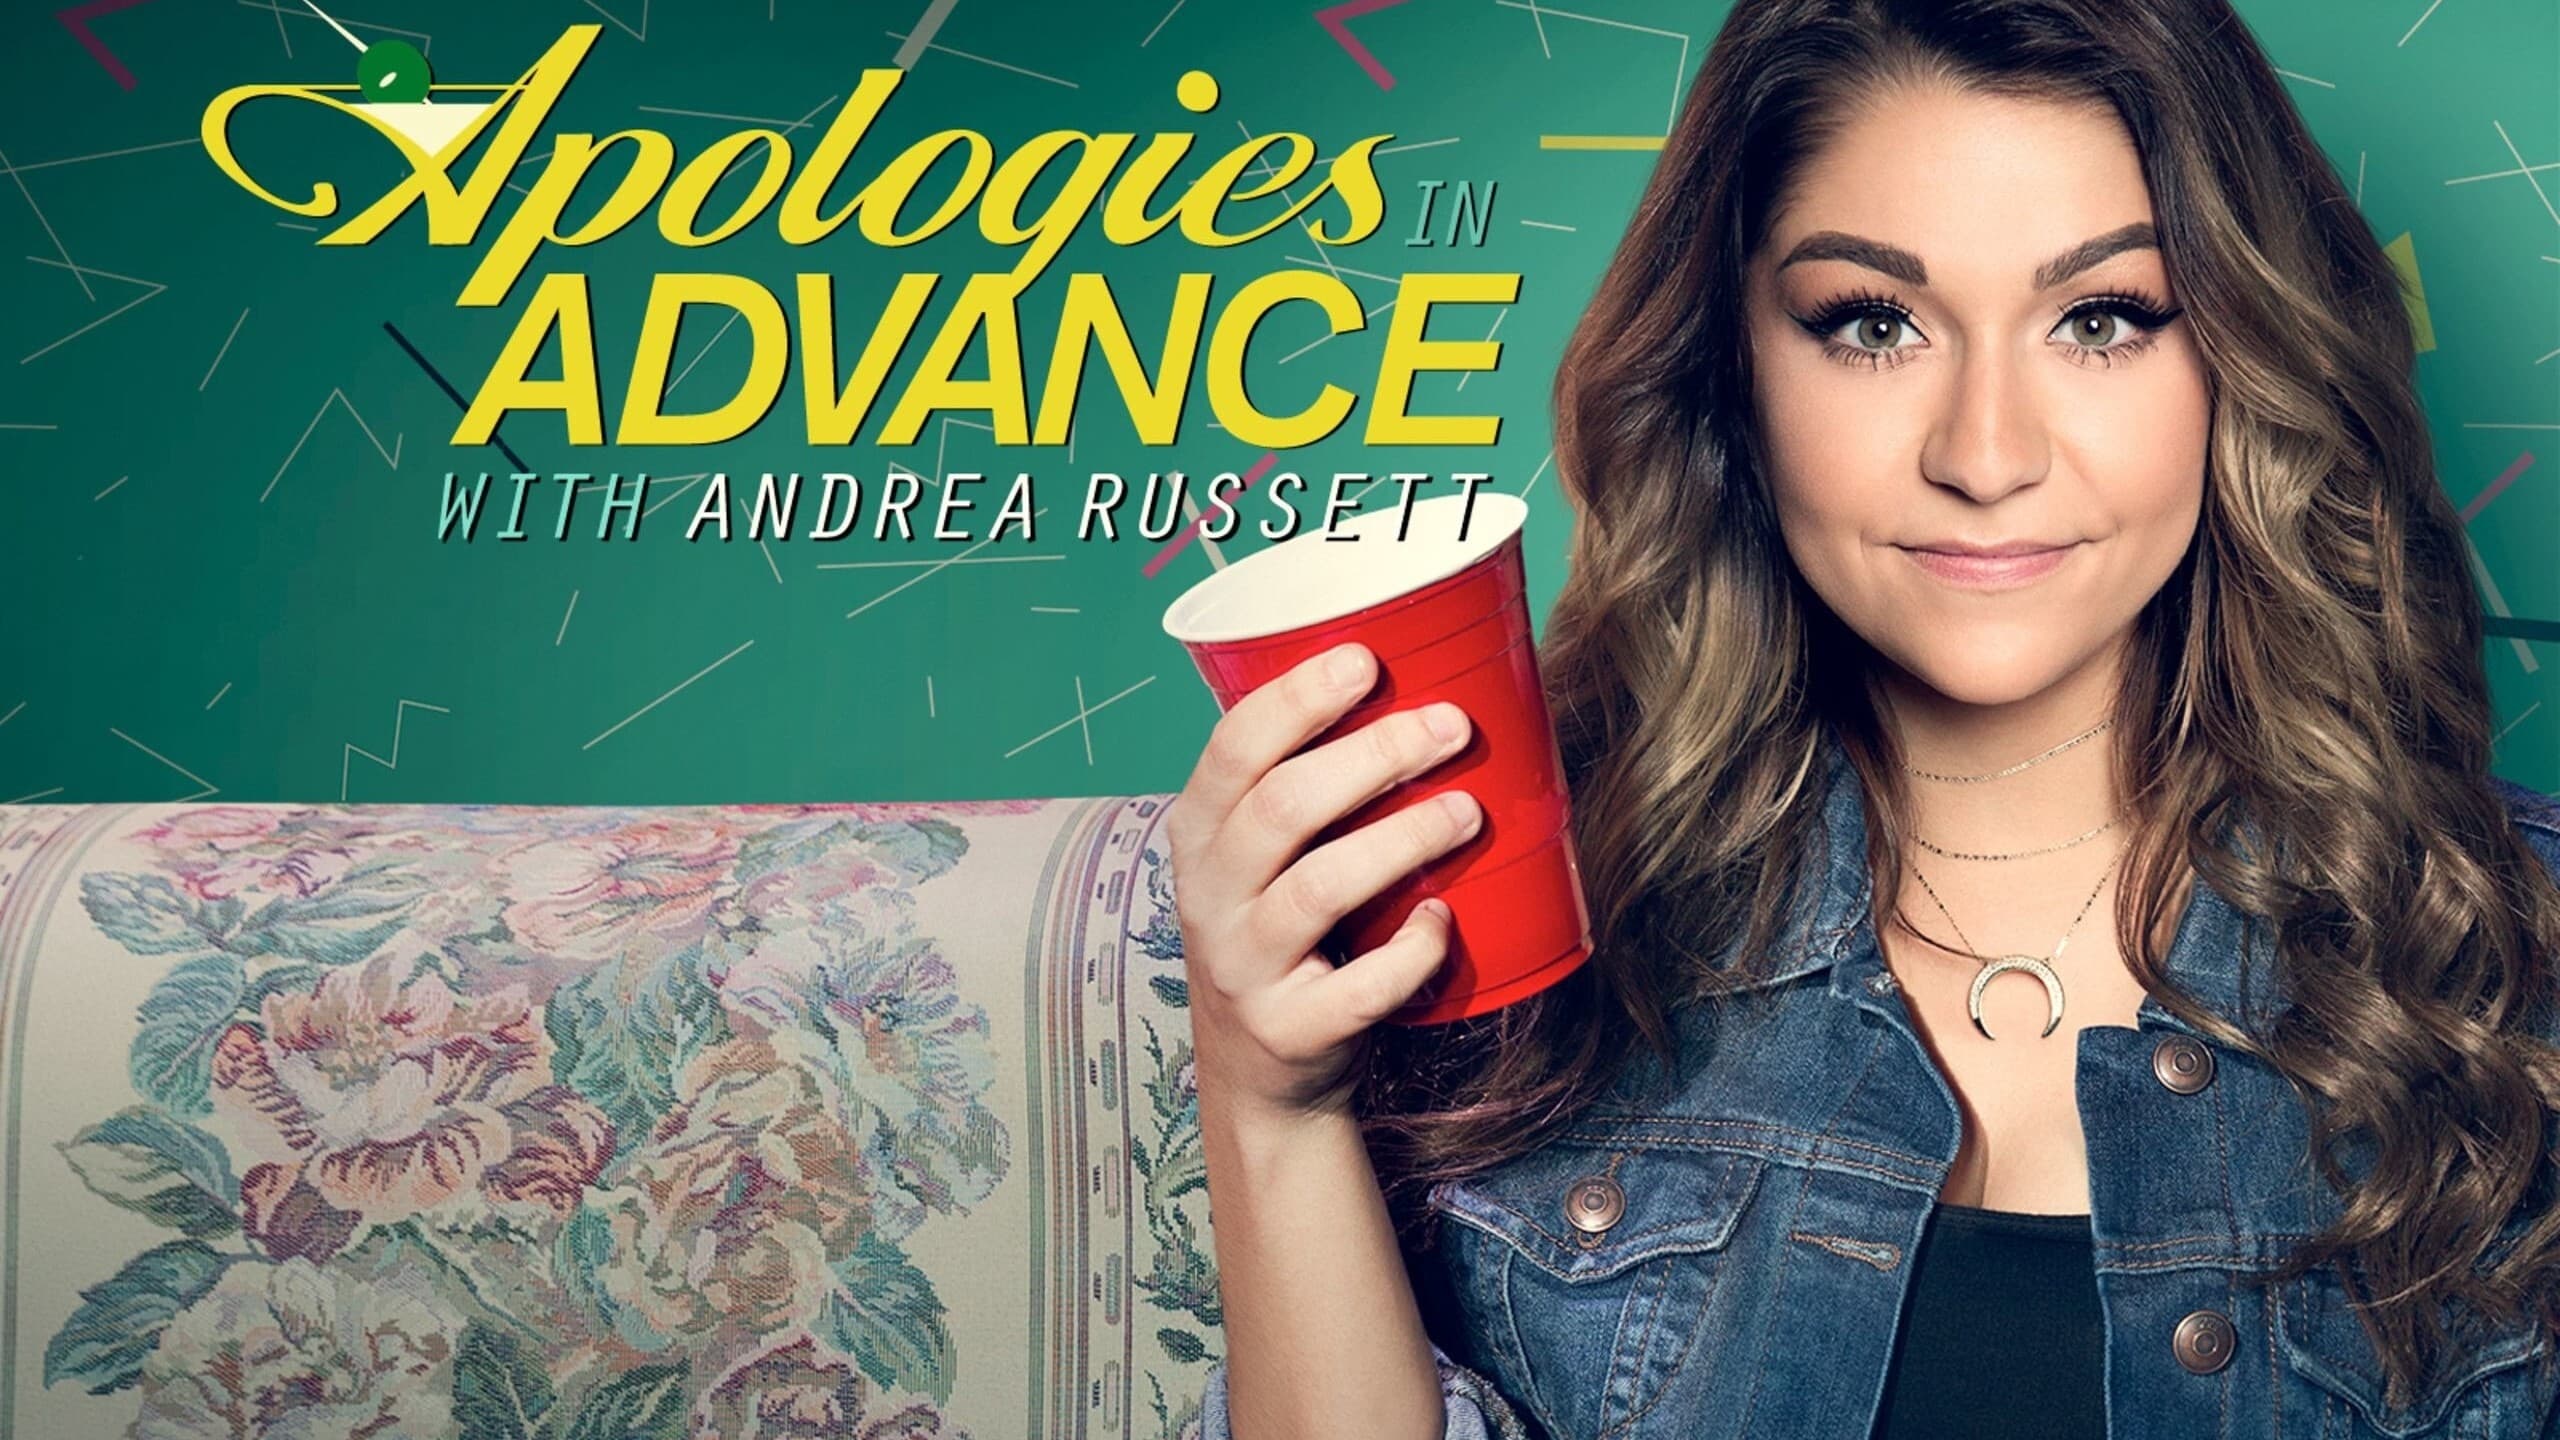 Apologies in Advance with Andrea Russett - serie